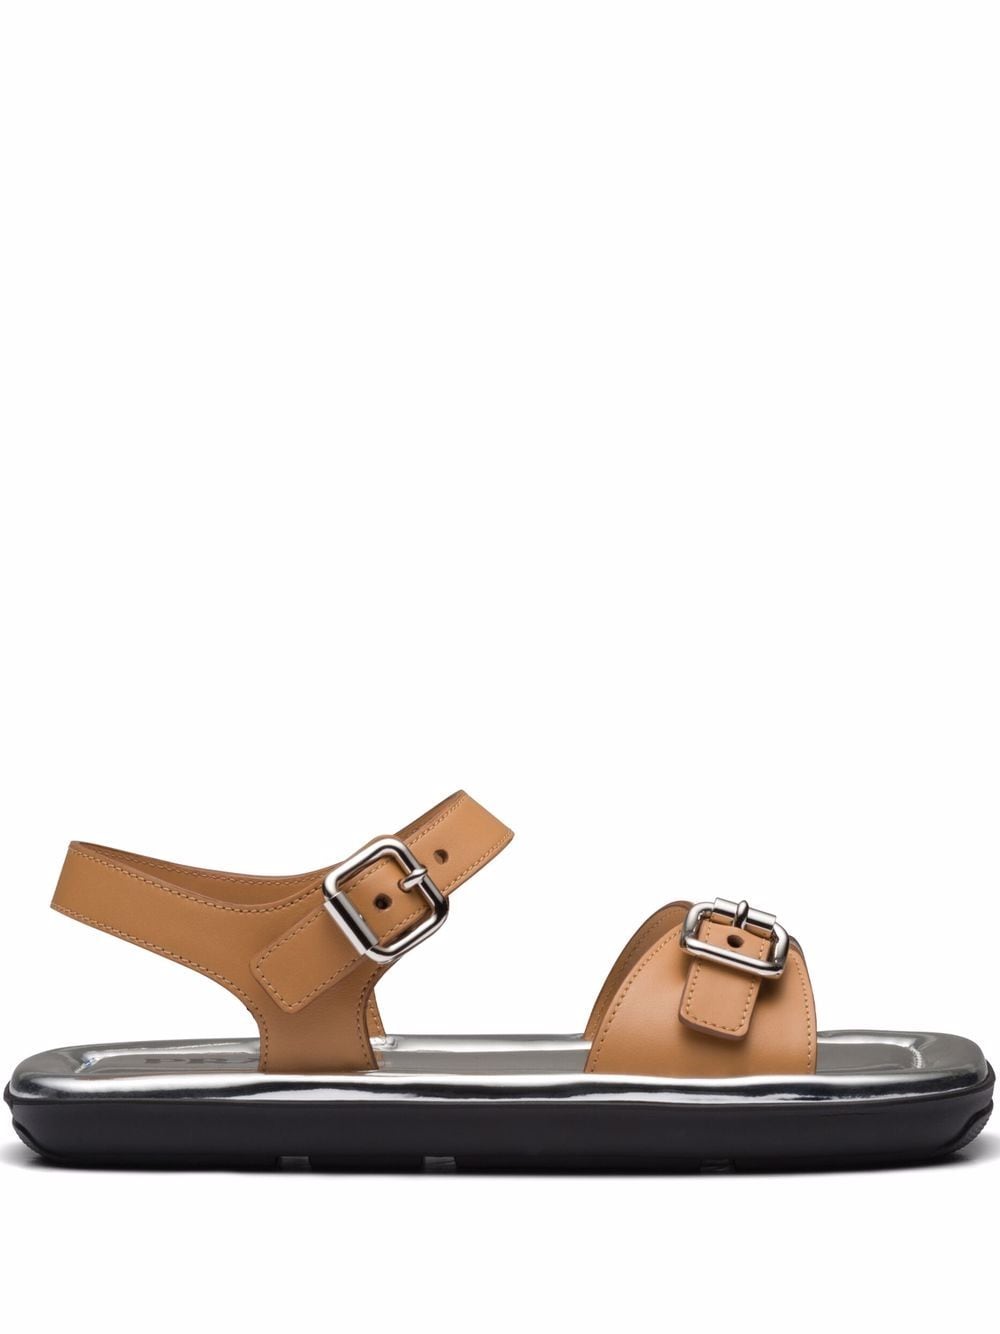 Prada - square-toe sandals - women - Leather/Leather/Rubber - 36.5 - Brown